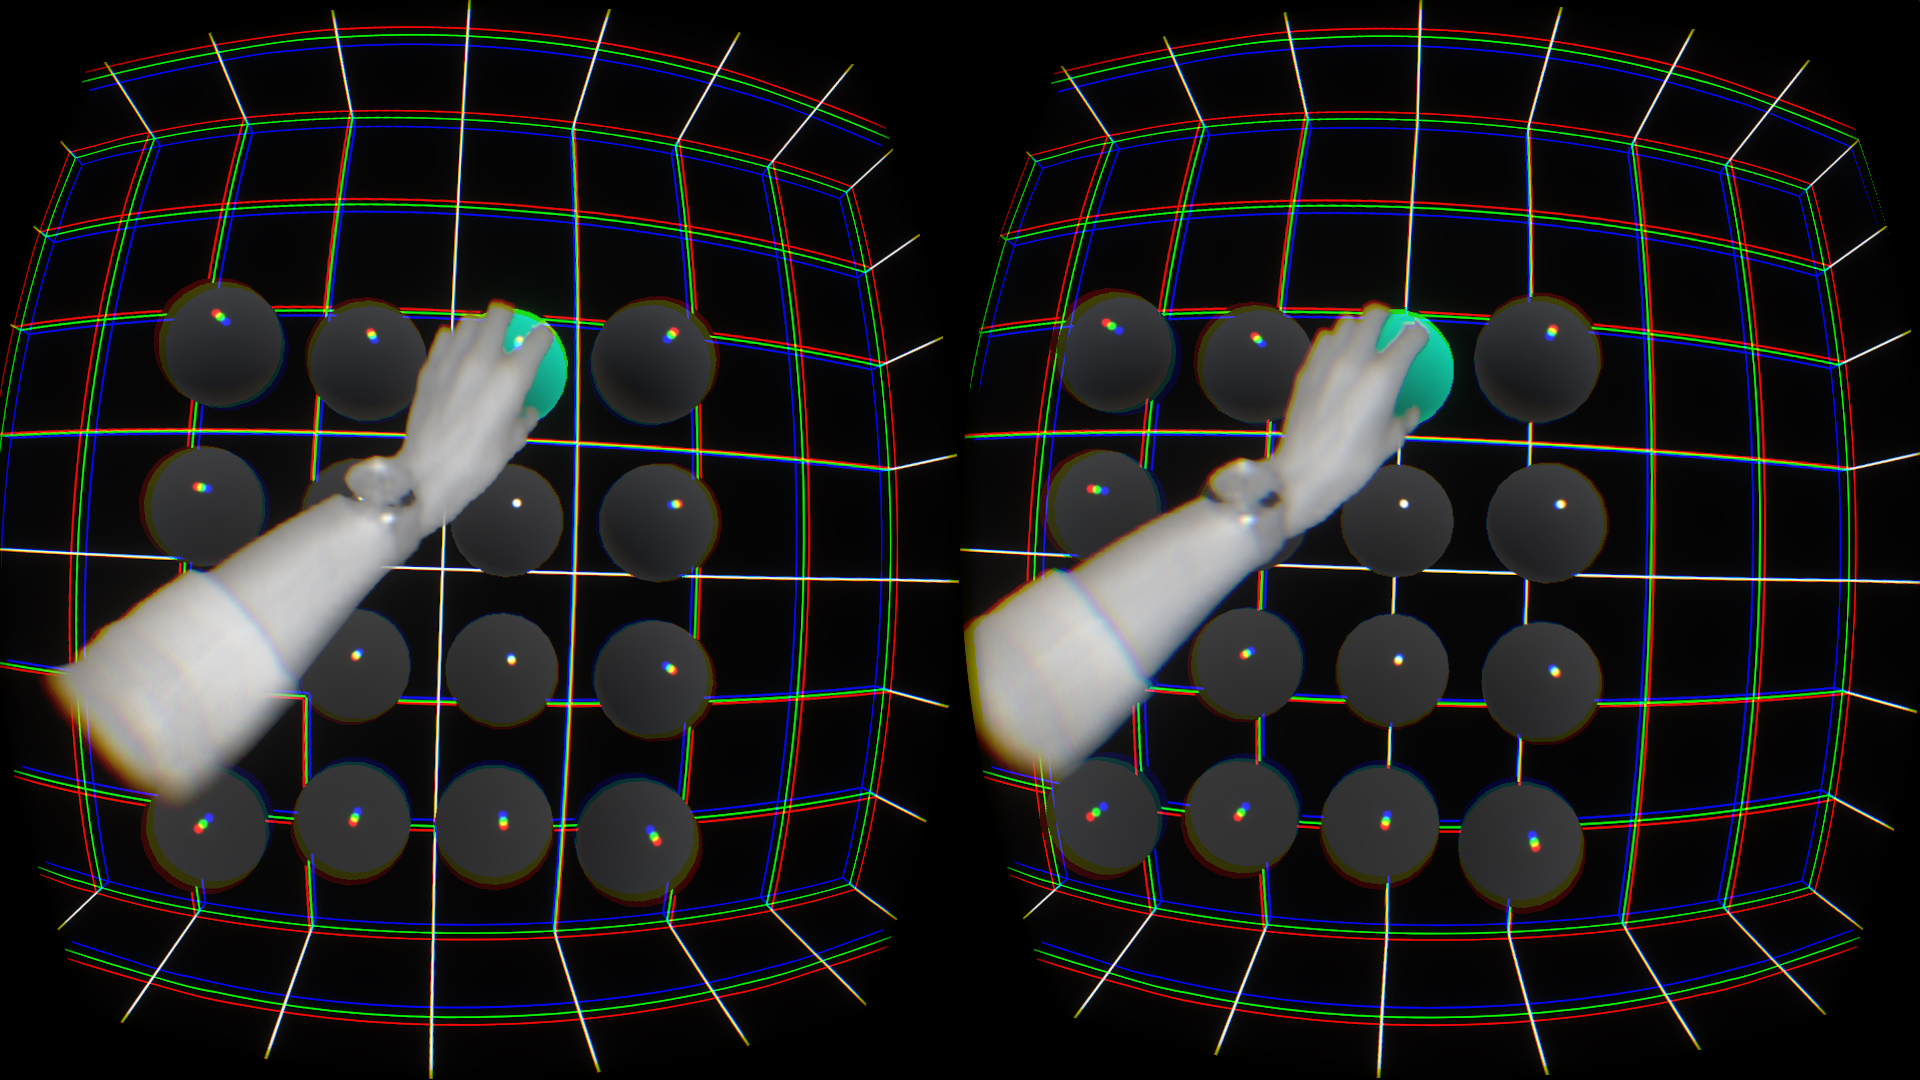 Leap Motion is perfecting natural hand gestures for VR